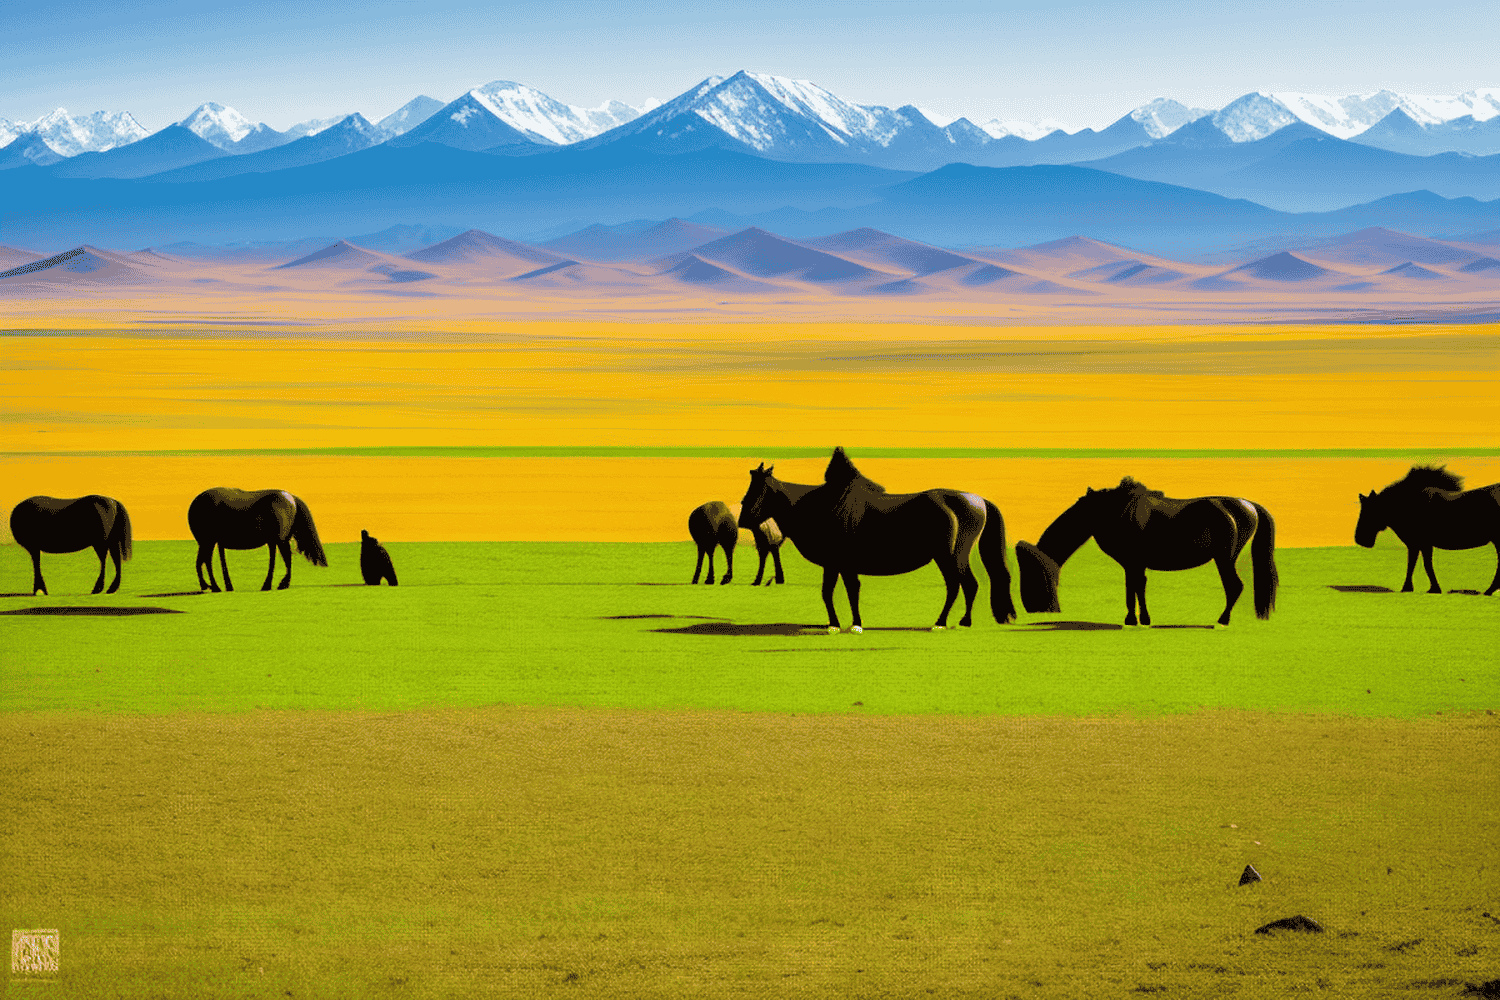 Information about Mongolia